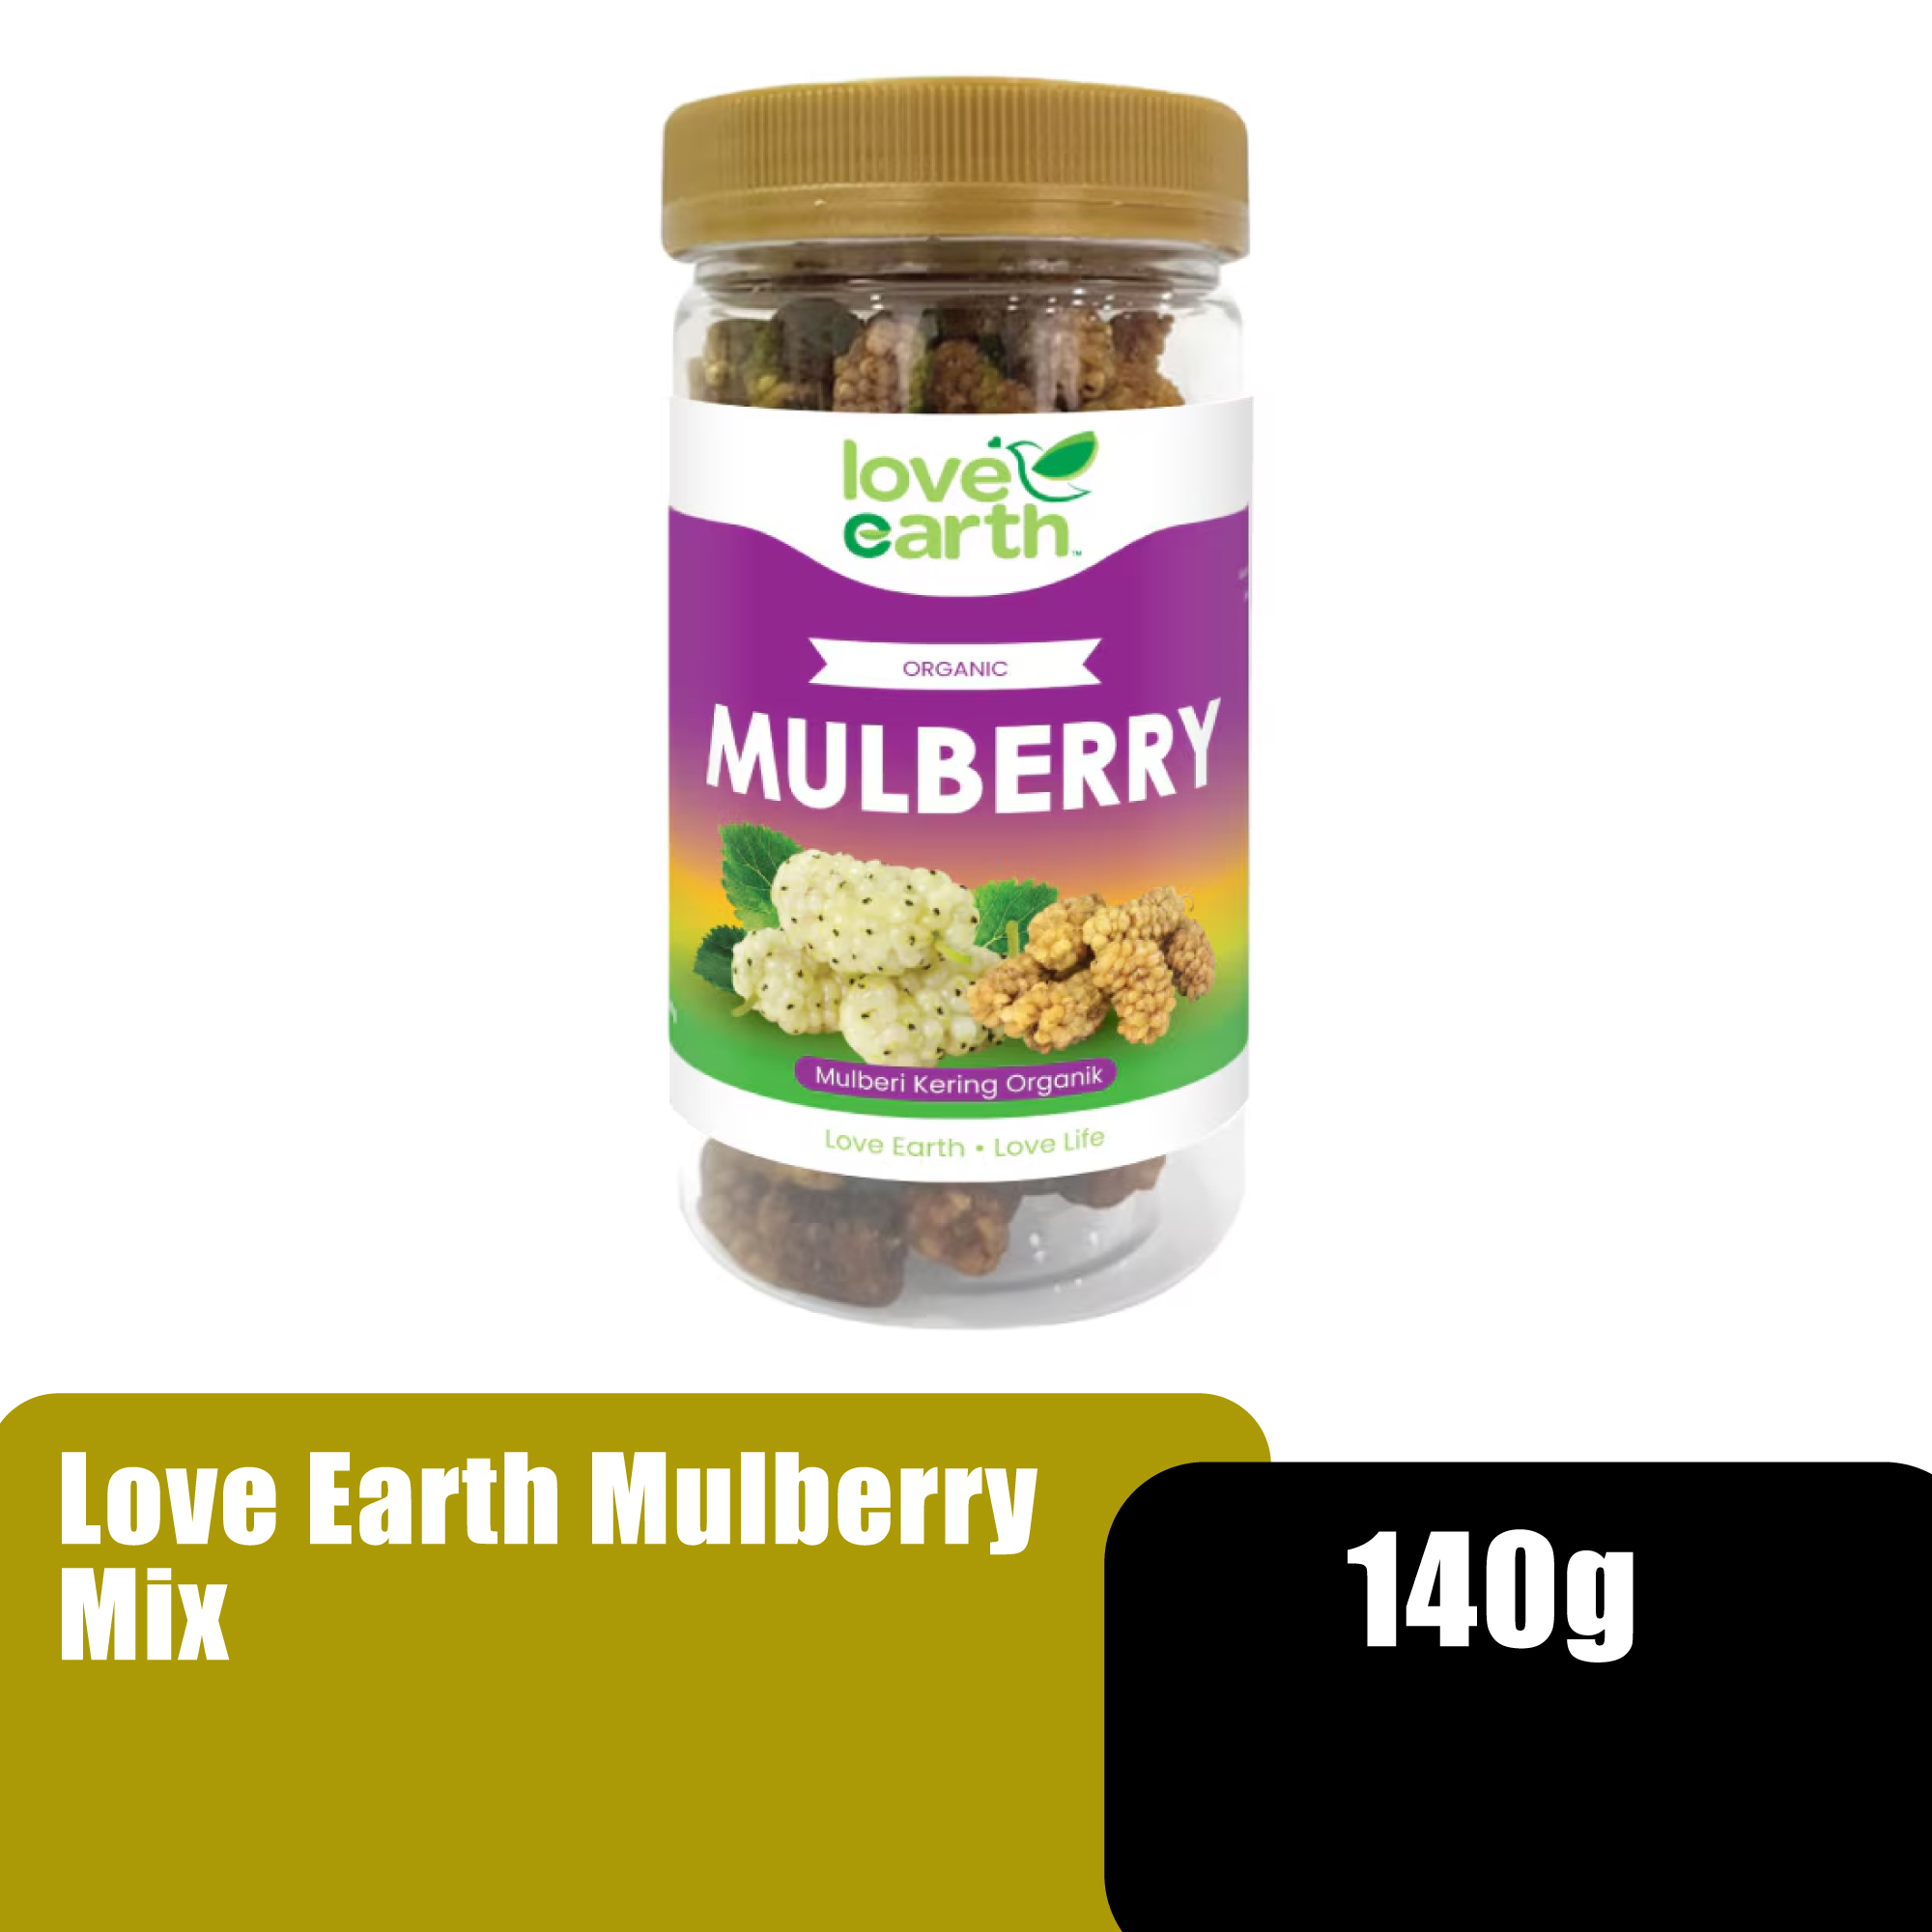 Love Earth Mulberry Mix, Pakistan Mixed Berry, Enriched with Vitamin C & Iron Vitamin, 干果 - 140g